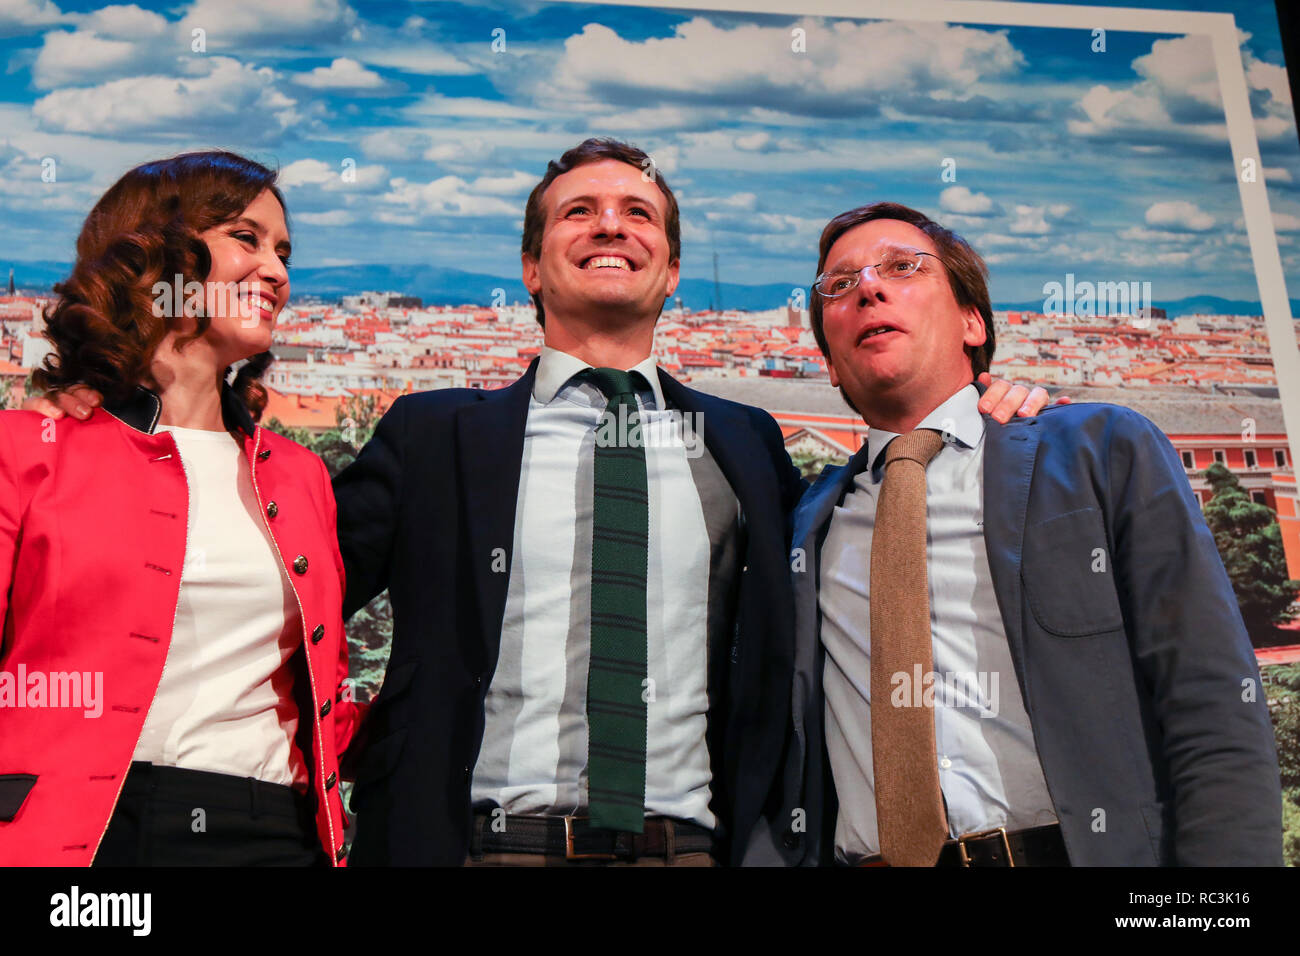 Madrid, Spain. 13th Janaury 2019. ISABEL DIAZ AYUSO, Candidate for Mayor of Madrid City Council, PABLO CASADO, President of the National Popular Party and JOSE LUIS MARTINES-ALMEIDA, Candidate for President of the Community of Madrid greeting the attendees. The PP of Madrid has celebrated this Sunday a multitudinous act in the theater Goya the presentation of José Luis Martínez-Almeida and Isabel Díaz Ayuso that will be the candidates of the PP to the City council and the Community of Madrid, respectively, for the next regional and local elections of May.Credit: Jesús Hellin/Alamy Live News Stock Photo